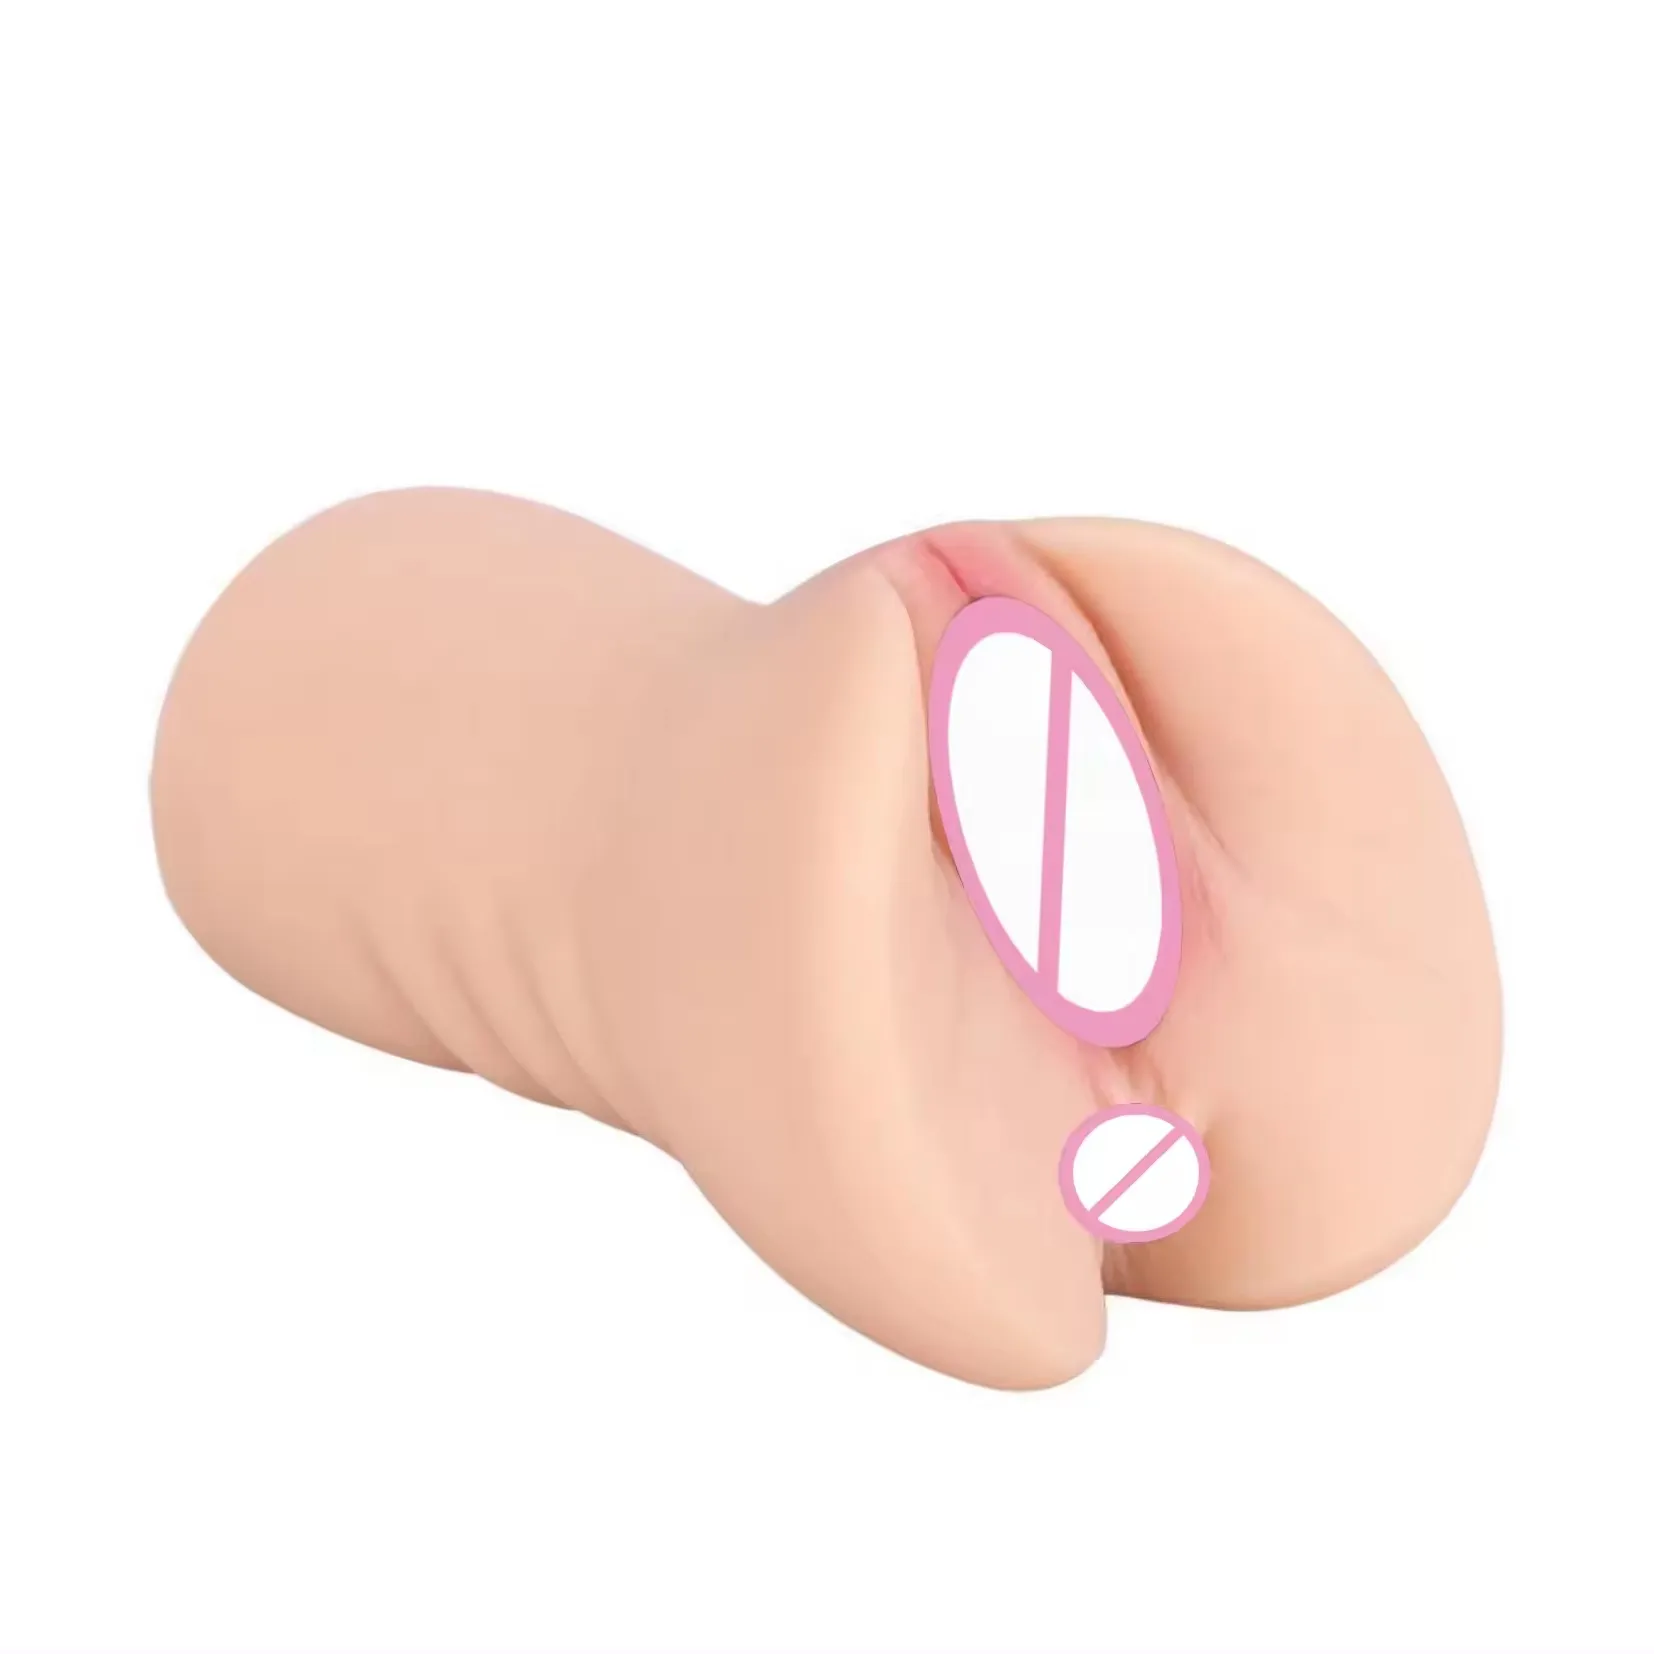 fat texture vagina tight anus for male adult sexual genitalia toy sax anal doll Silicone vagina toys